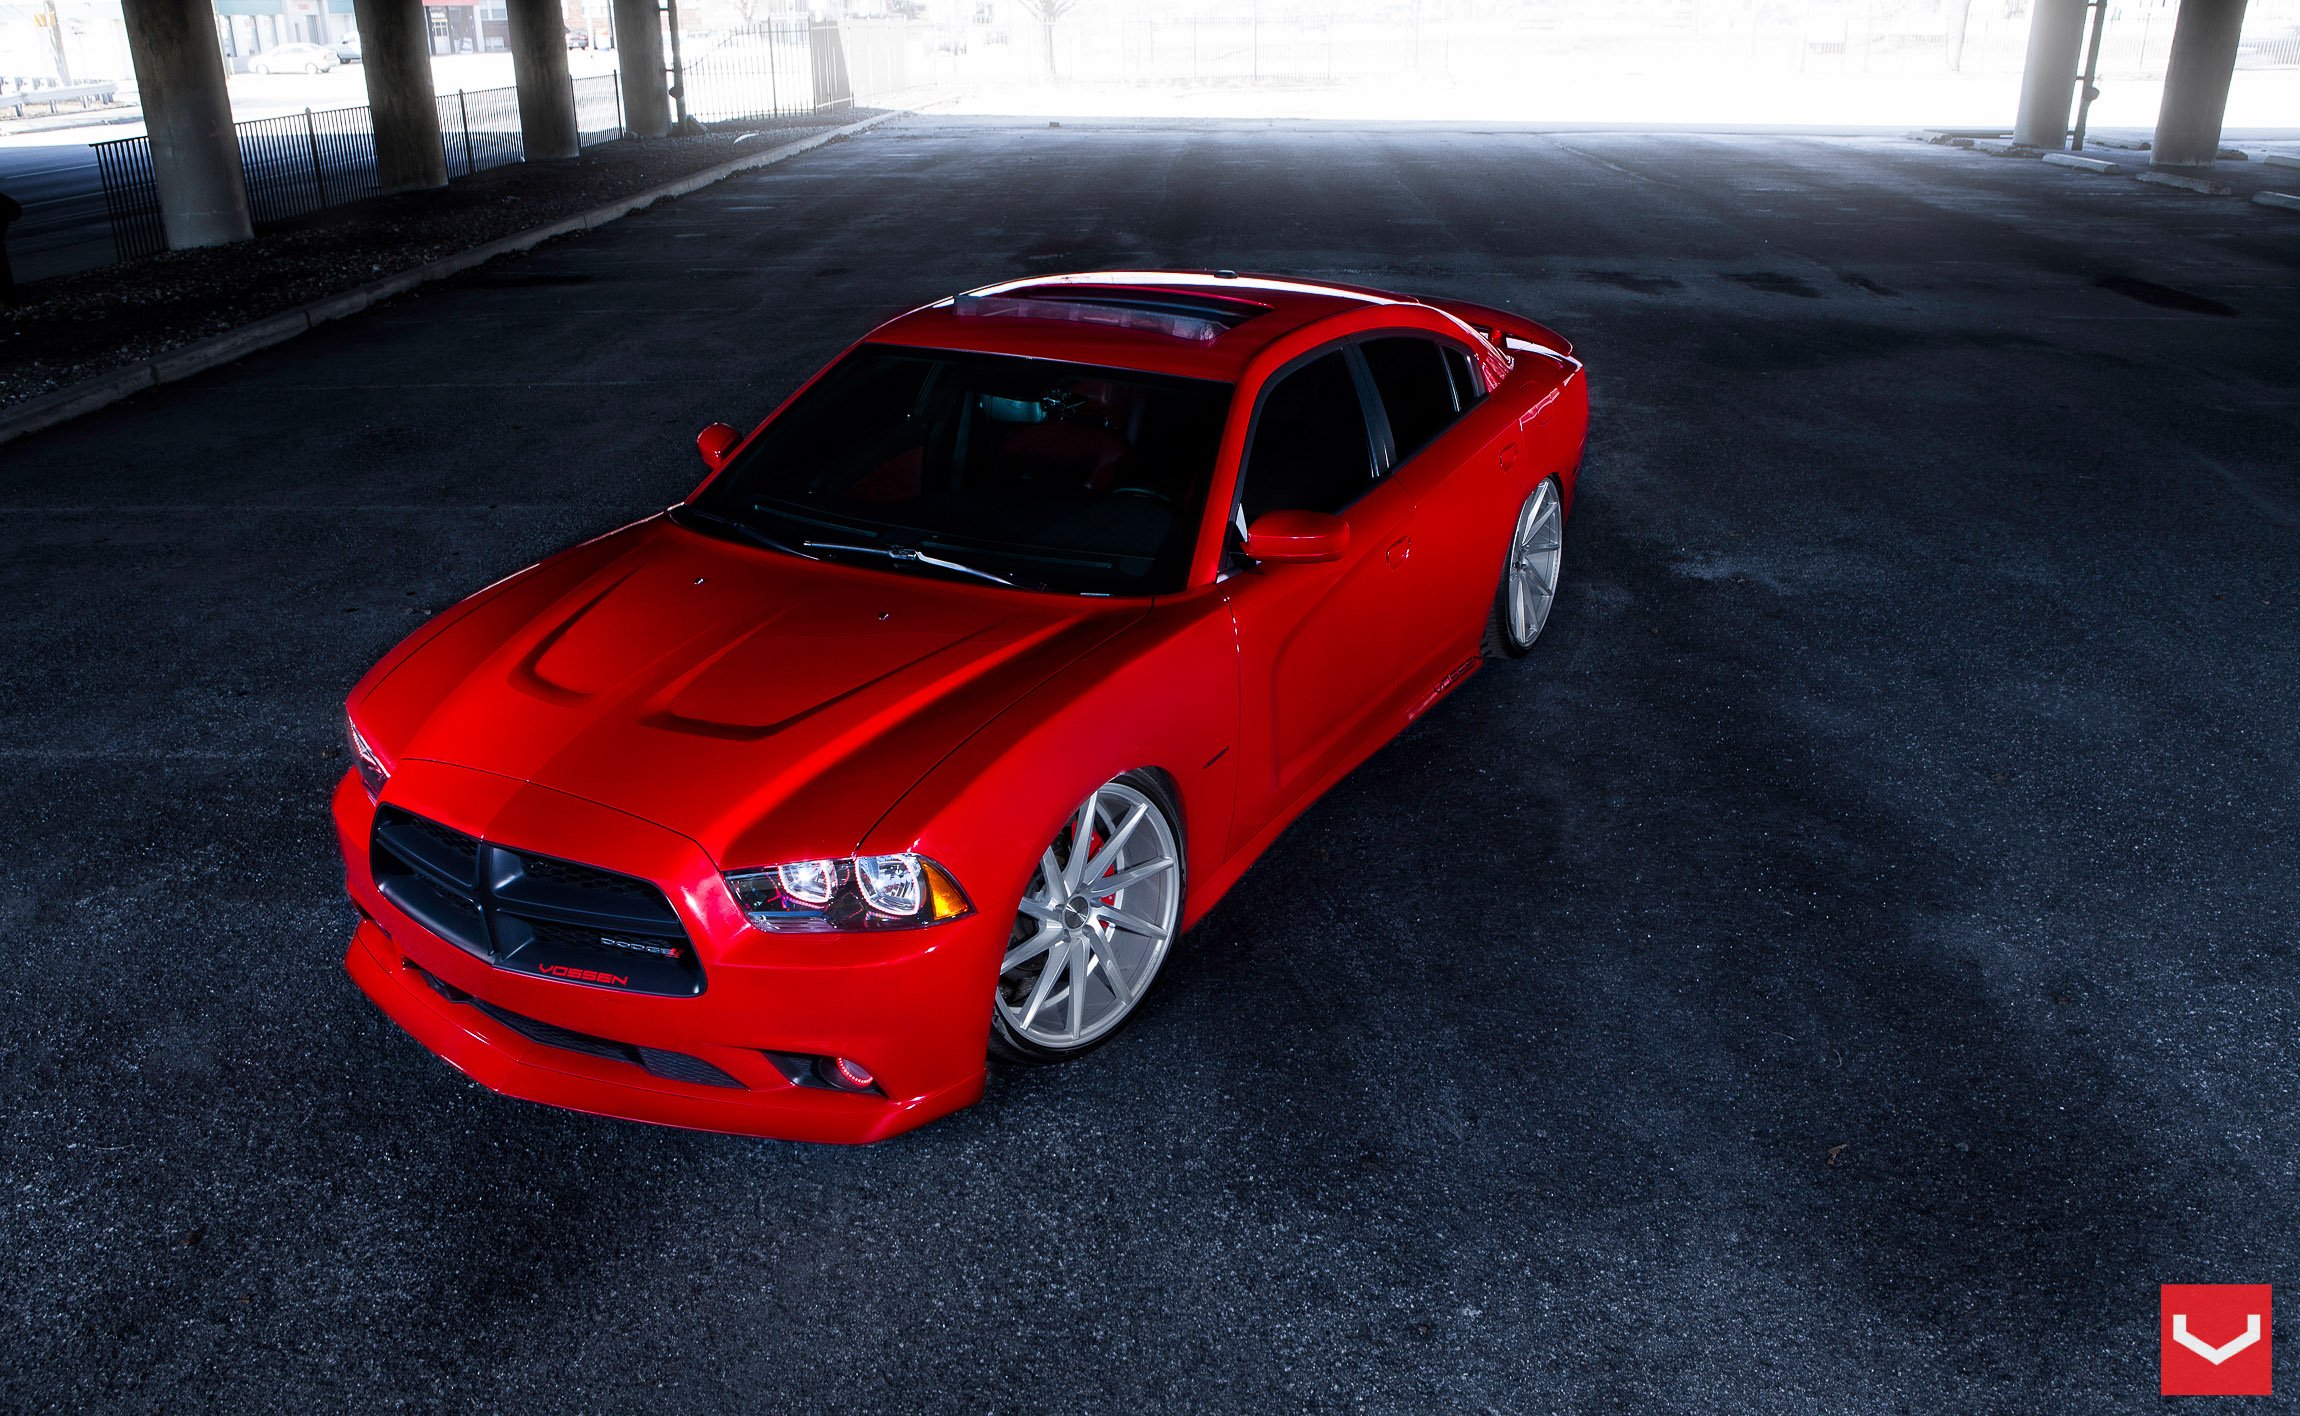 dodge, Charger, Vossen, Wheels, Tuning, Cars Wallpaper